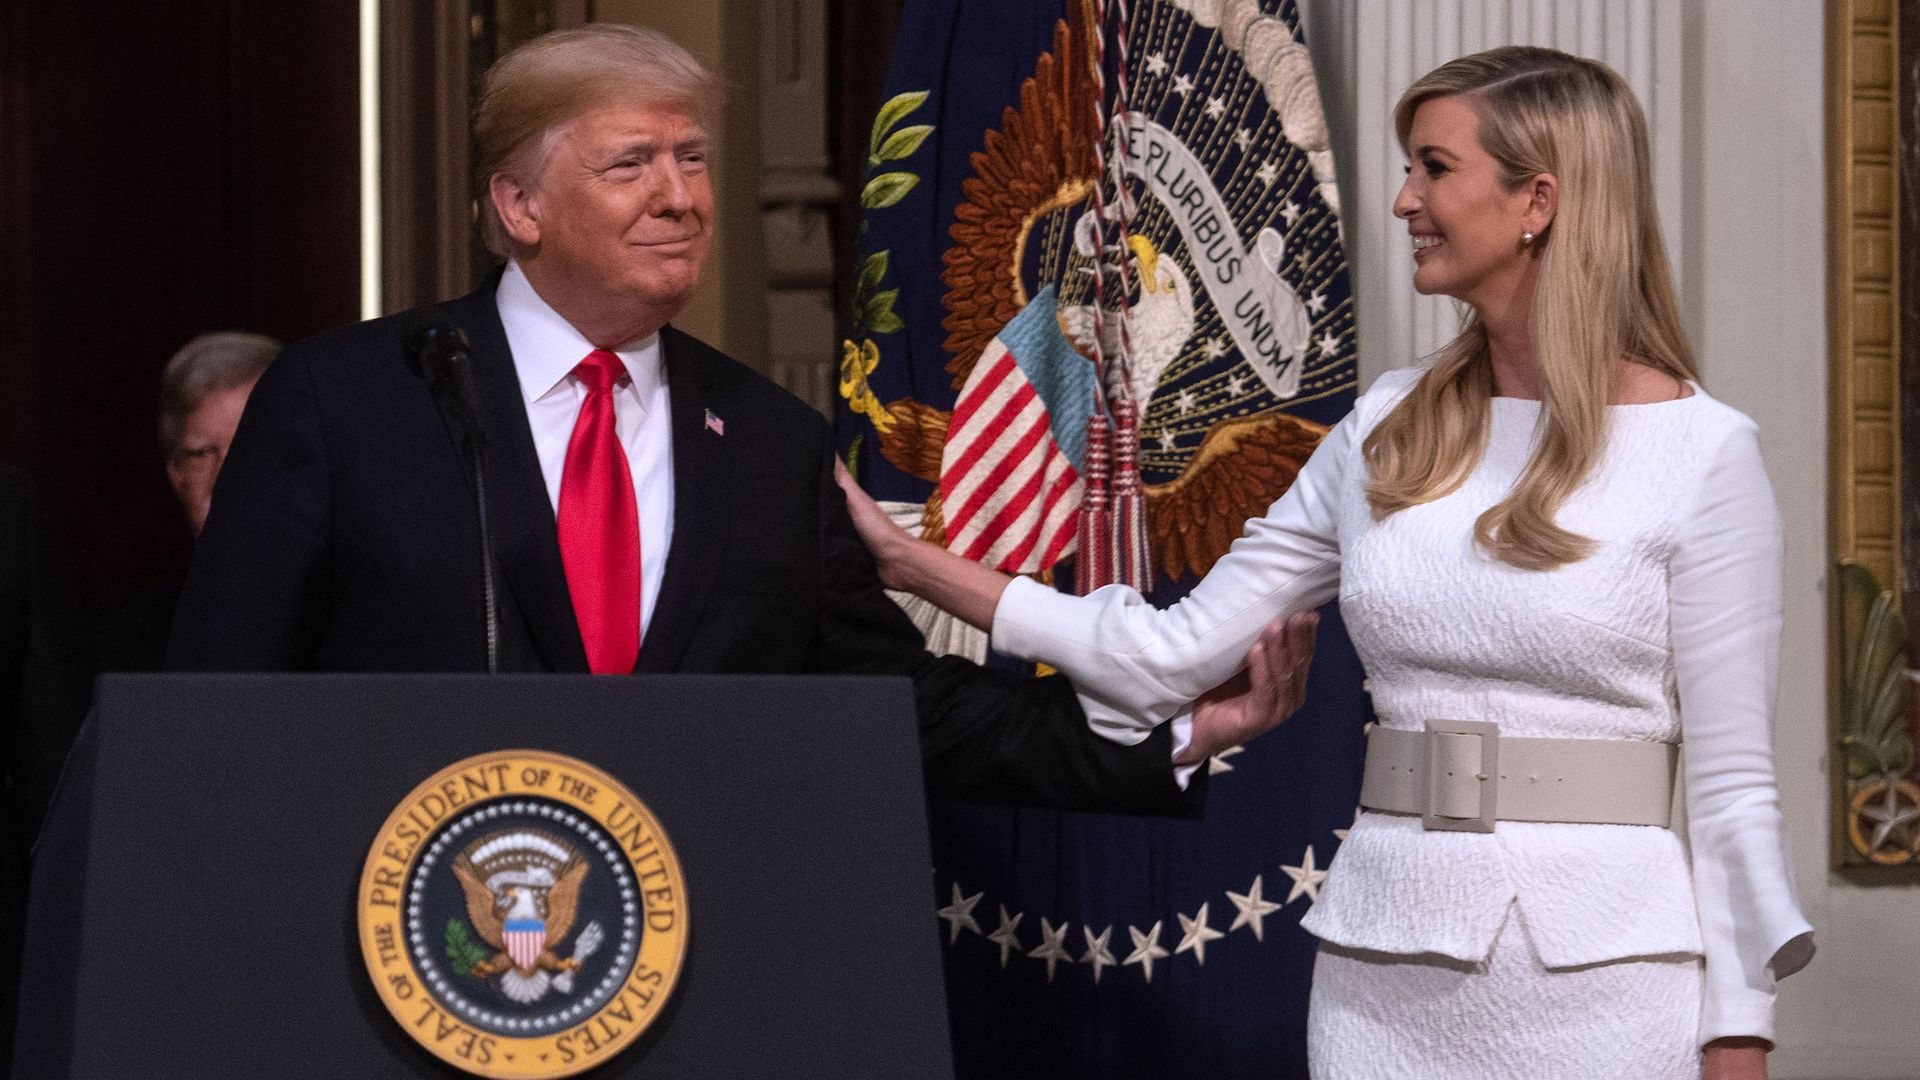 In this image, Ivanka stands next to Trump as he stands behind a podium. She smiles at him and places a hand on his shoulder.